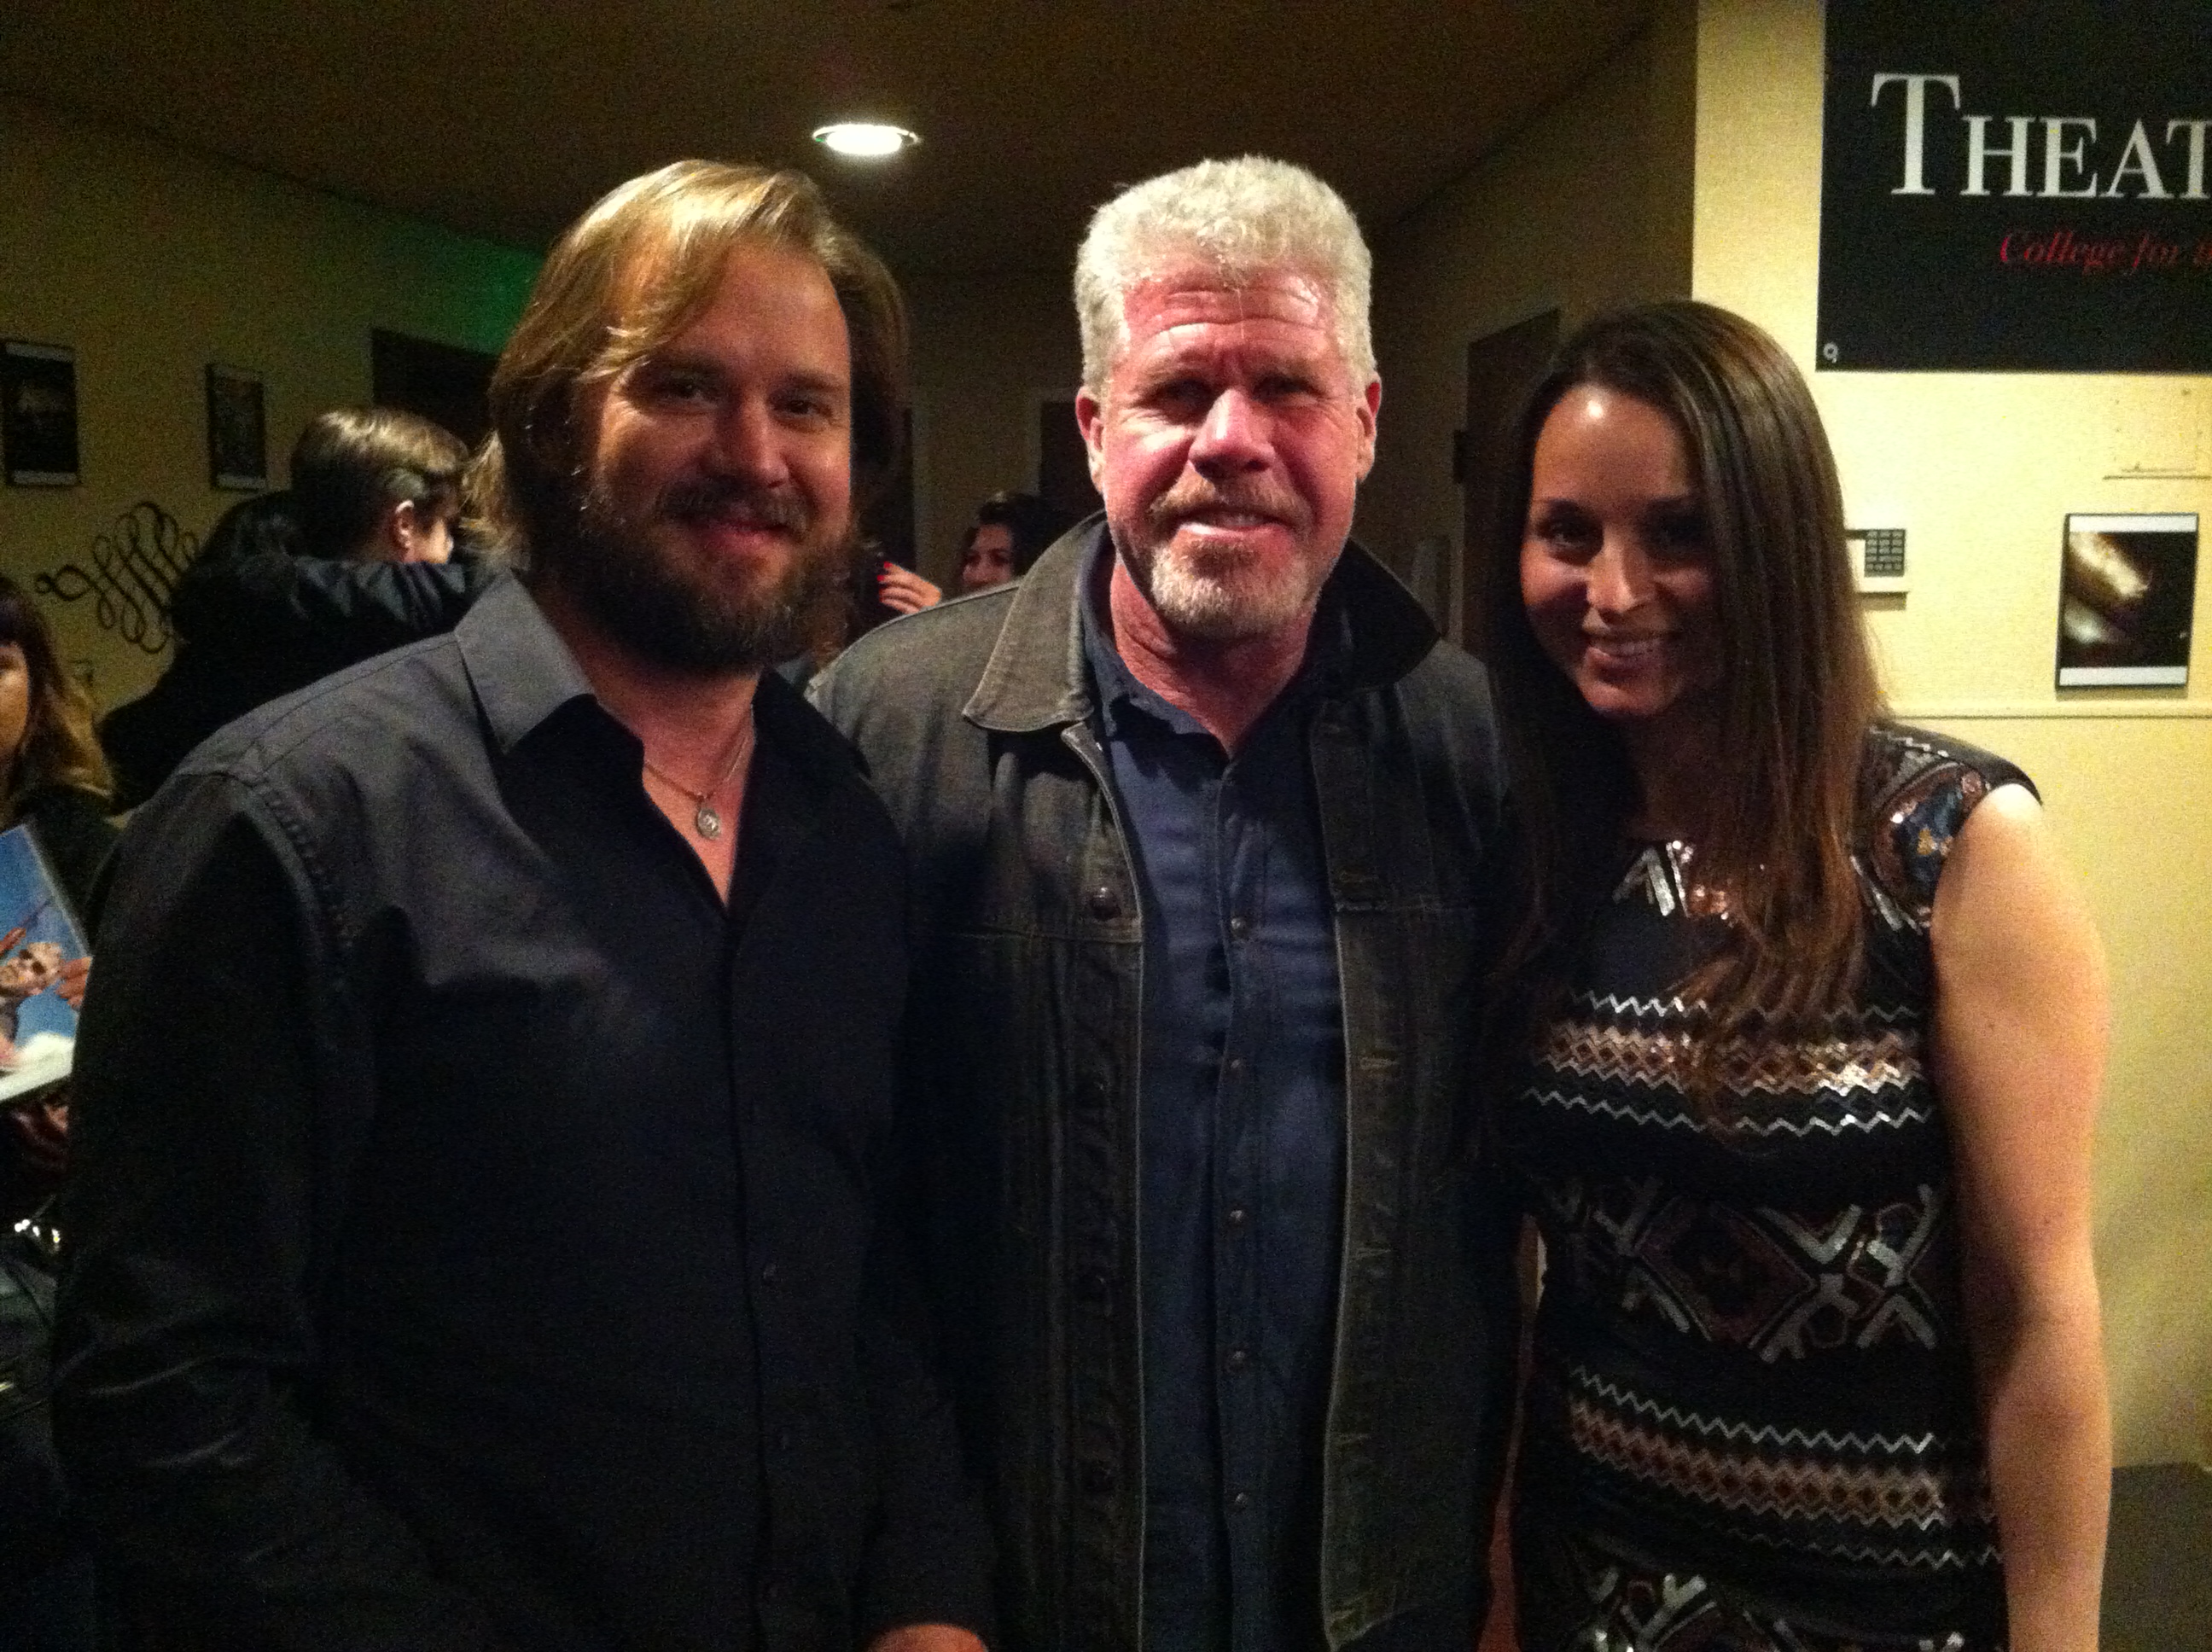 Canadian Actor Sheldon Charron and his wife Monique Lopez with Ron Pearlman (Sons of Anarchy, Hellraiser) at the Hollywood premiere of Greg Francis' movie Poker Night.